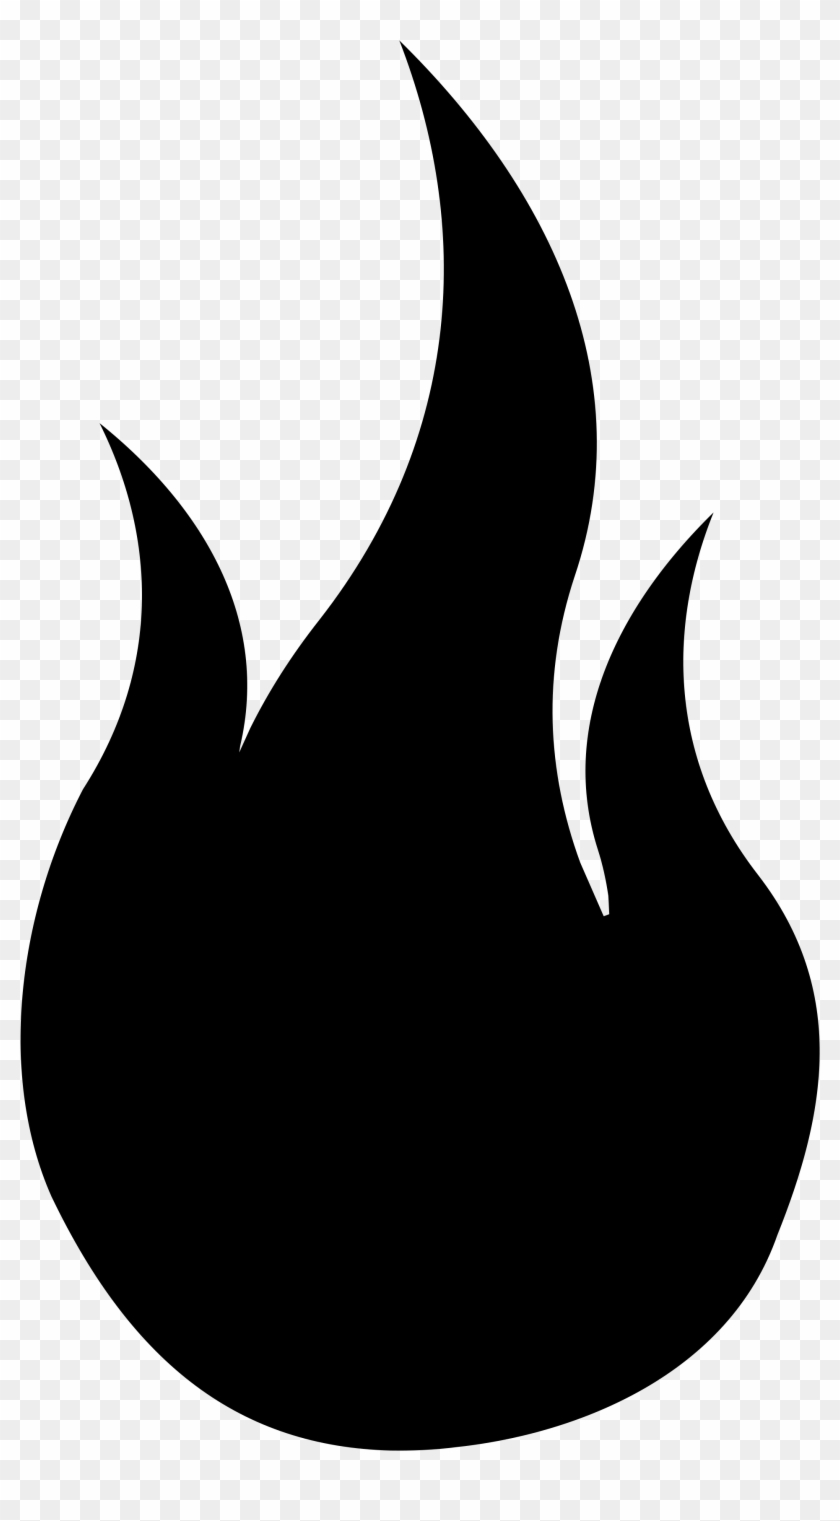 Svg Library Download File Flame Wikimedia Commons Open - Flame Svg Clipart #399076